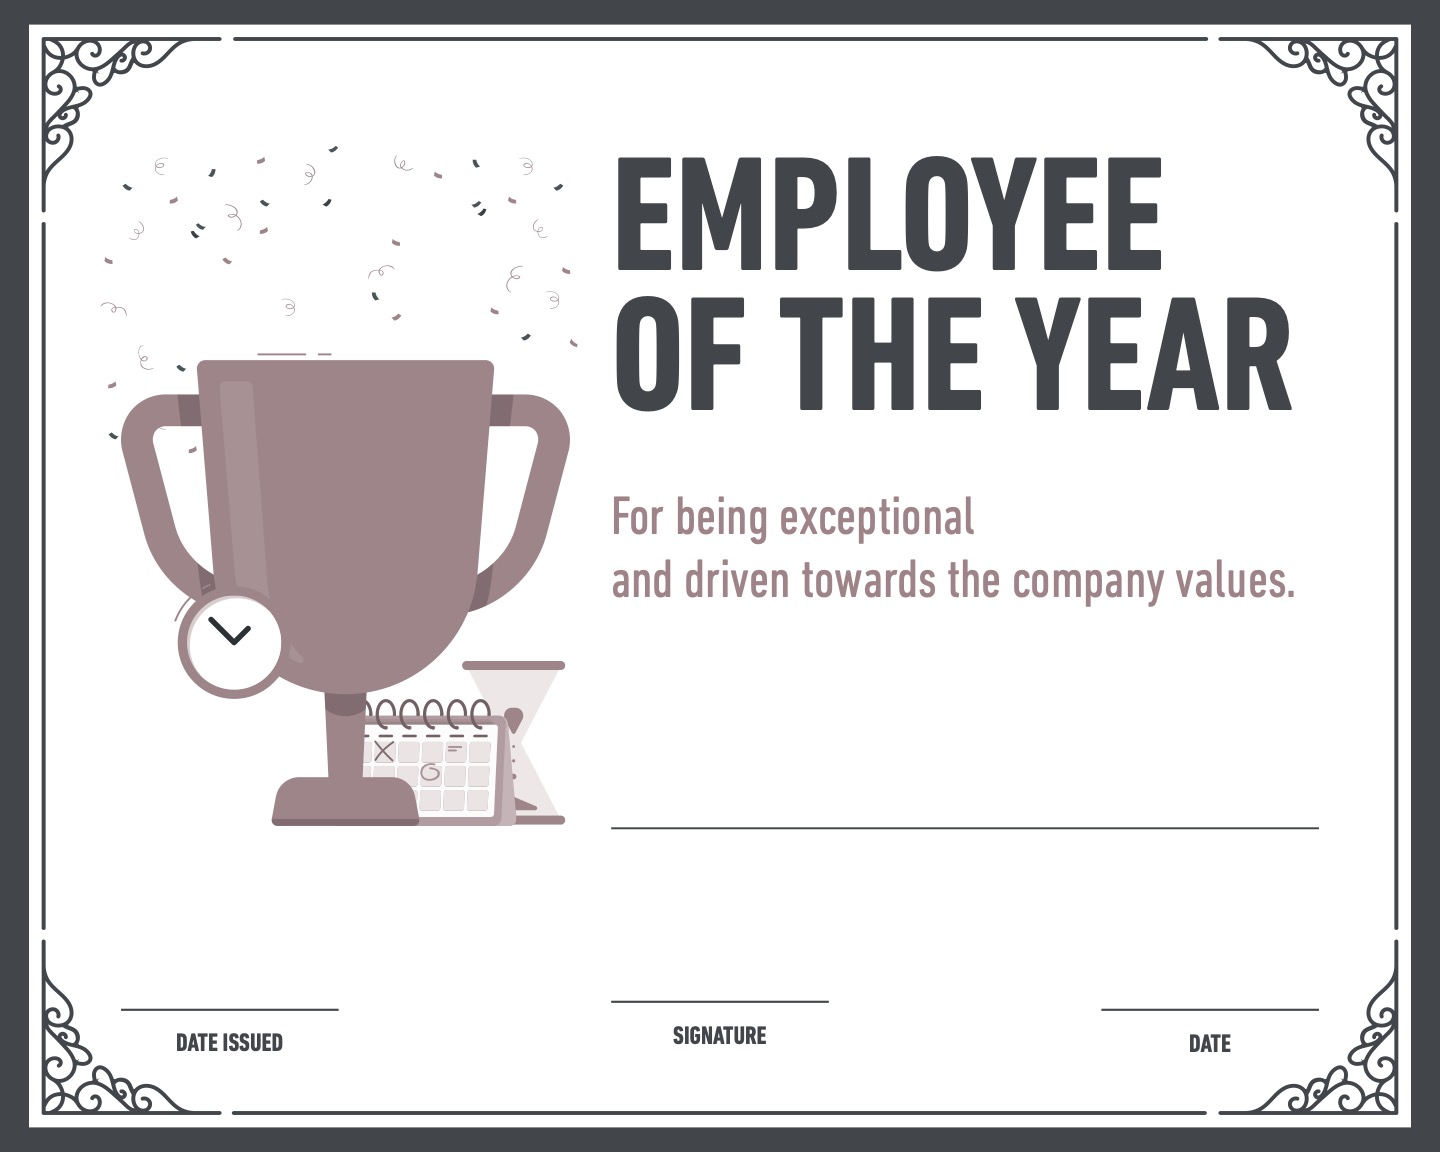 employee of the year certificate template free, certificate of employee of the year, employee of the year certificate format, free printable employee of year certificate, free employee of the year certificate template, best employee of the year certificate template, employee of the year award certificate template, employee award certificate template word, free employee appreciation templates